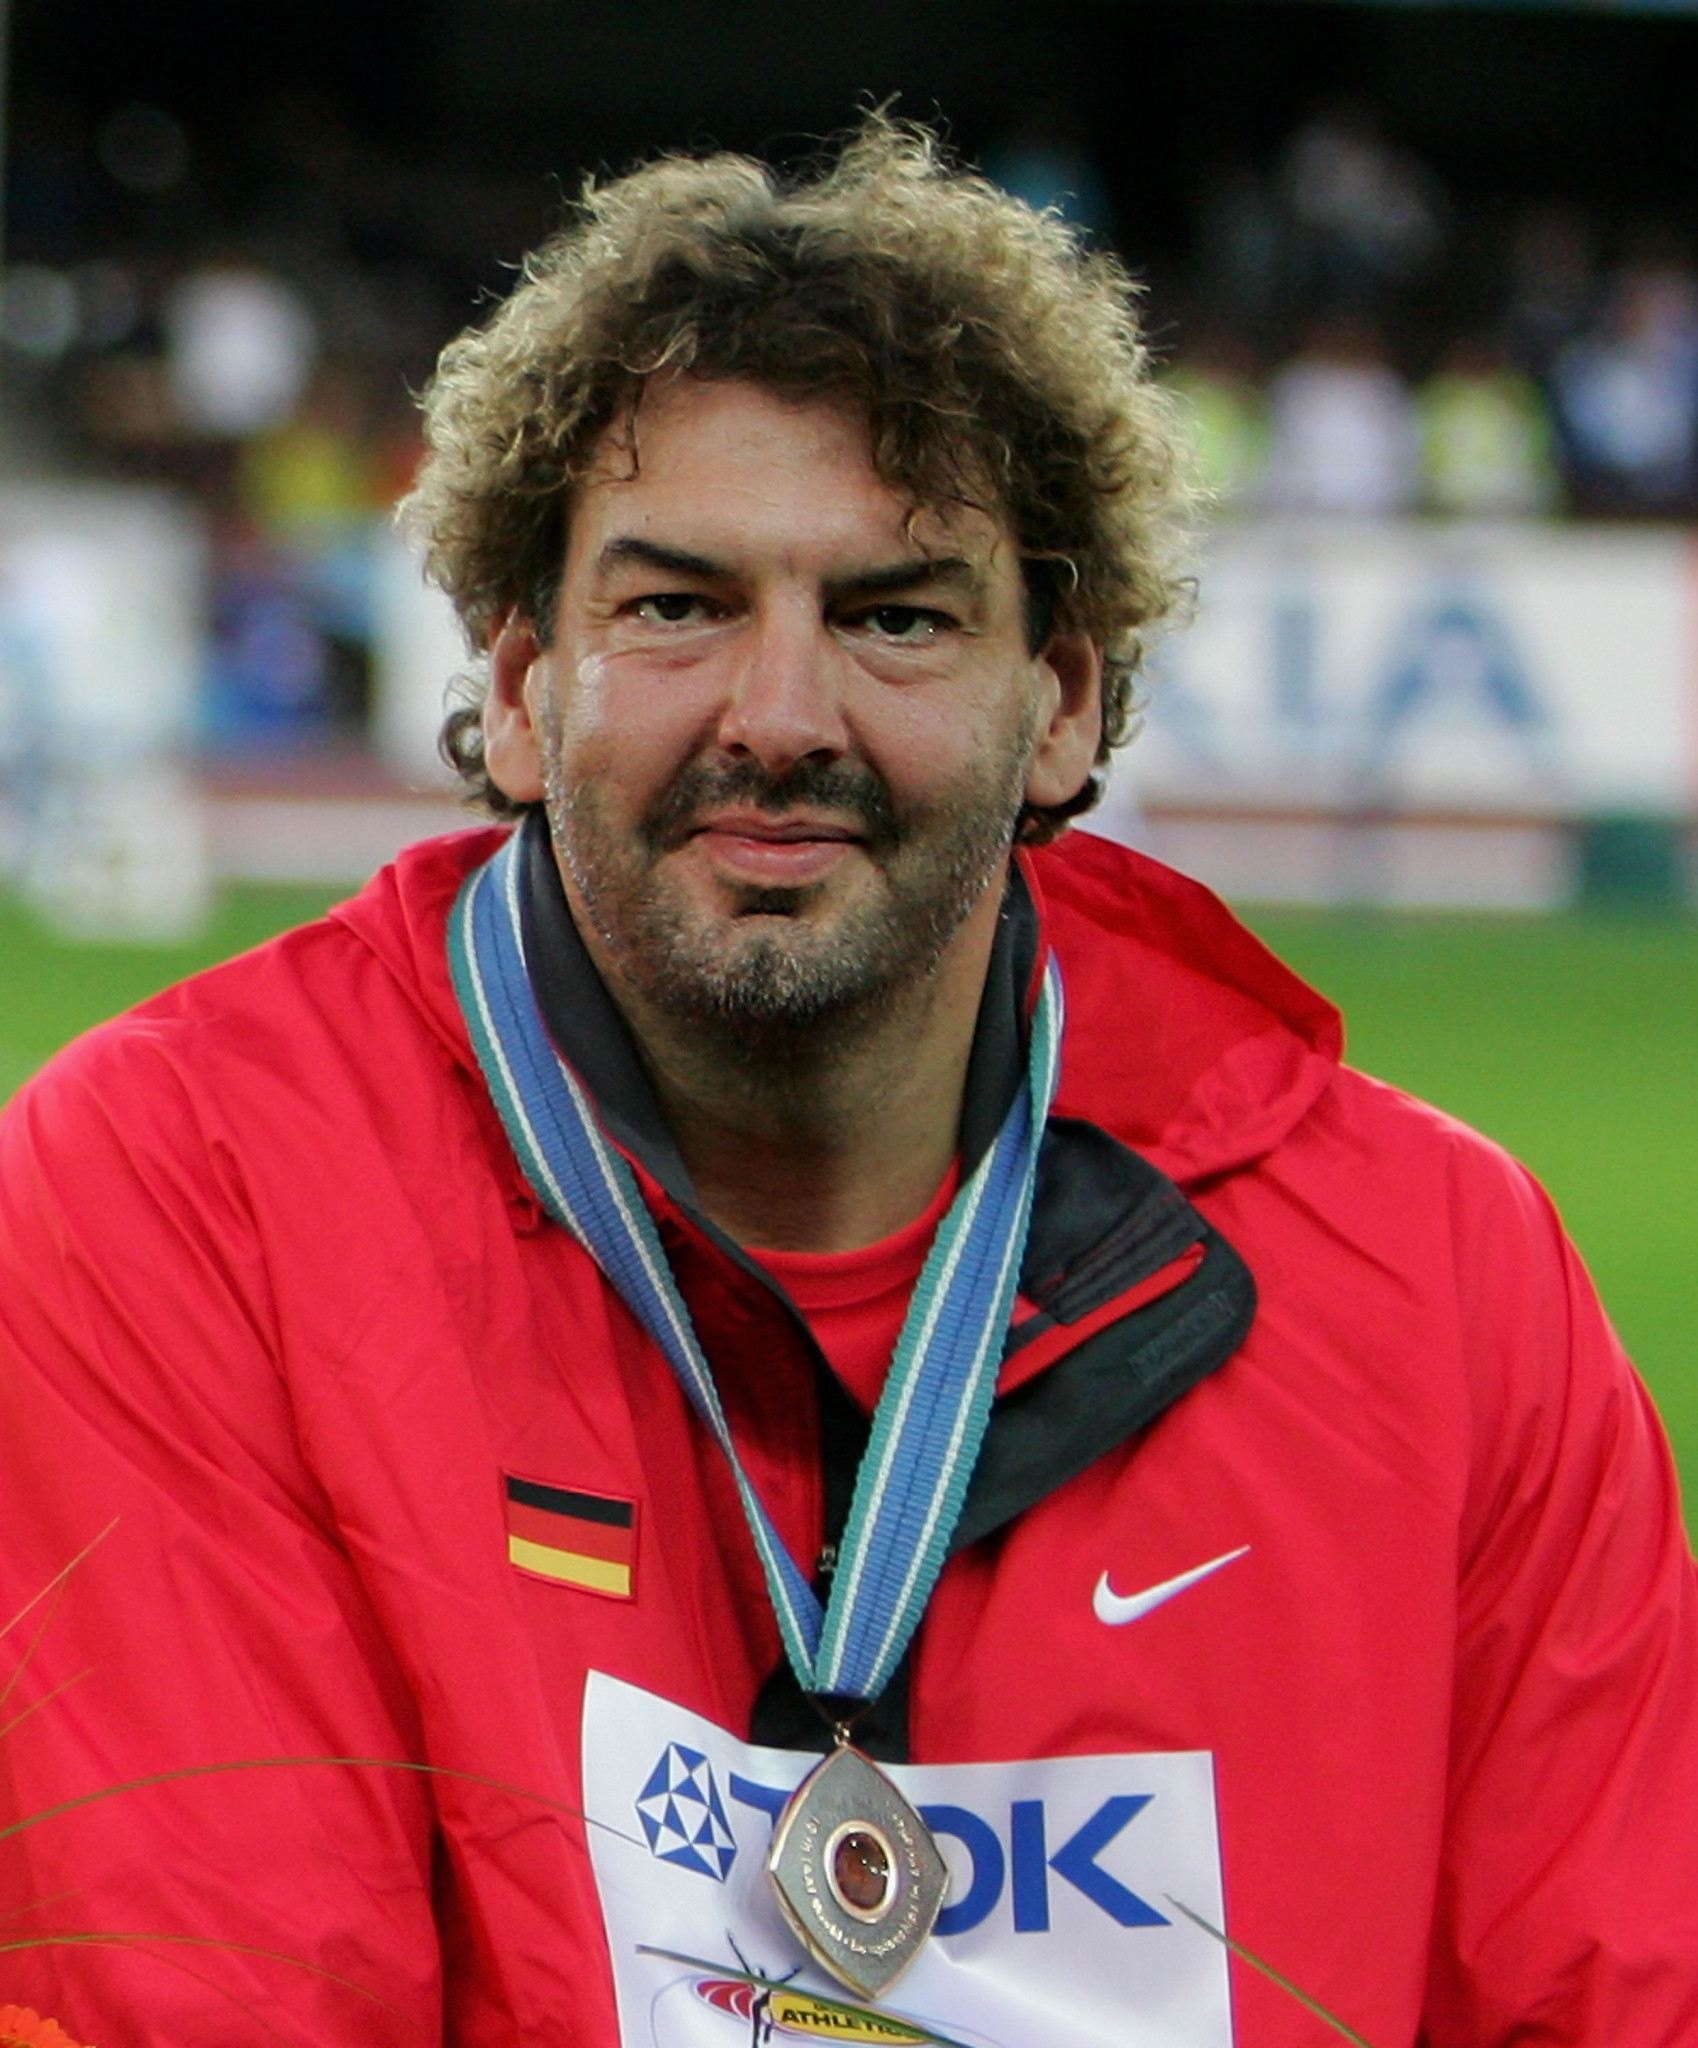 German double World Championships discus medallist dies at age of 52